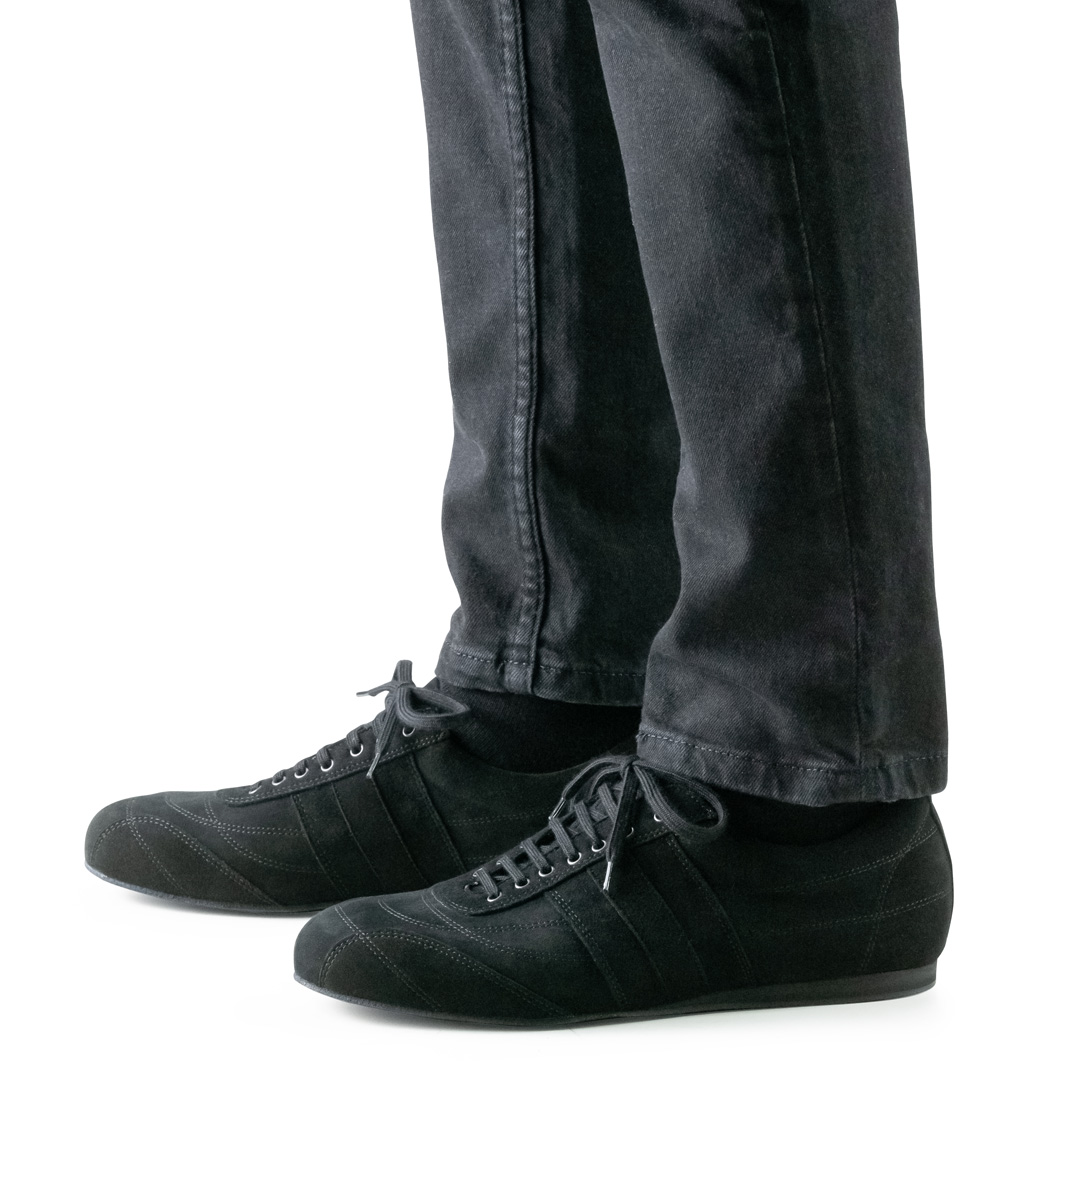 Werner Kern Men's Dance Shoe in Velour in Combination with Black Trousers